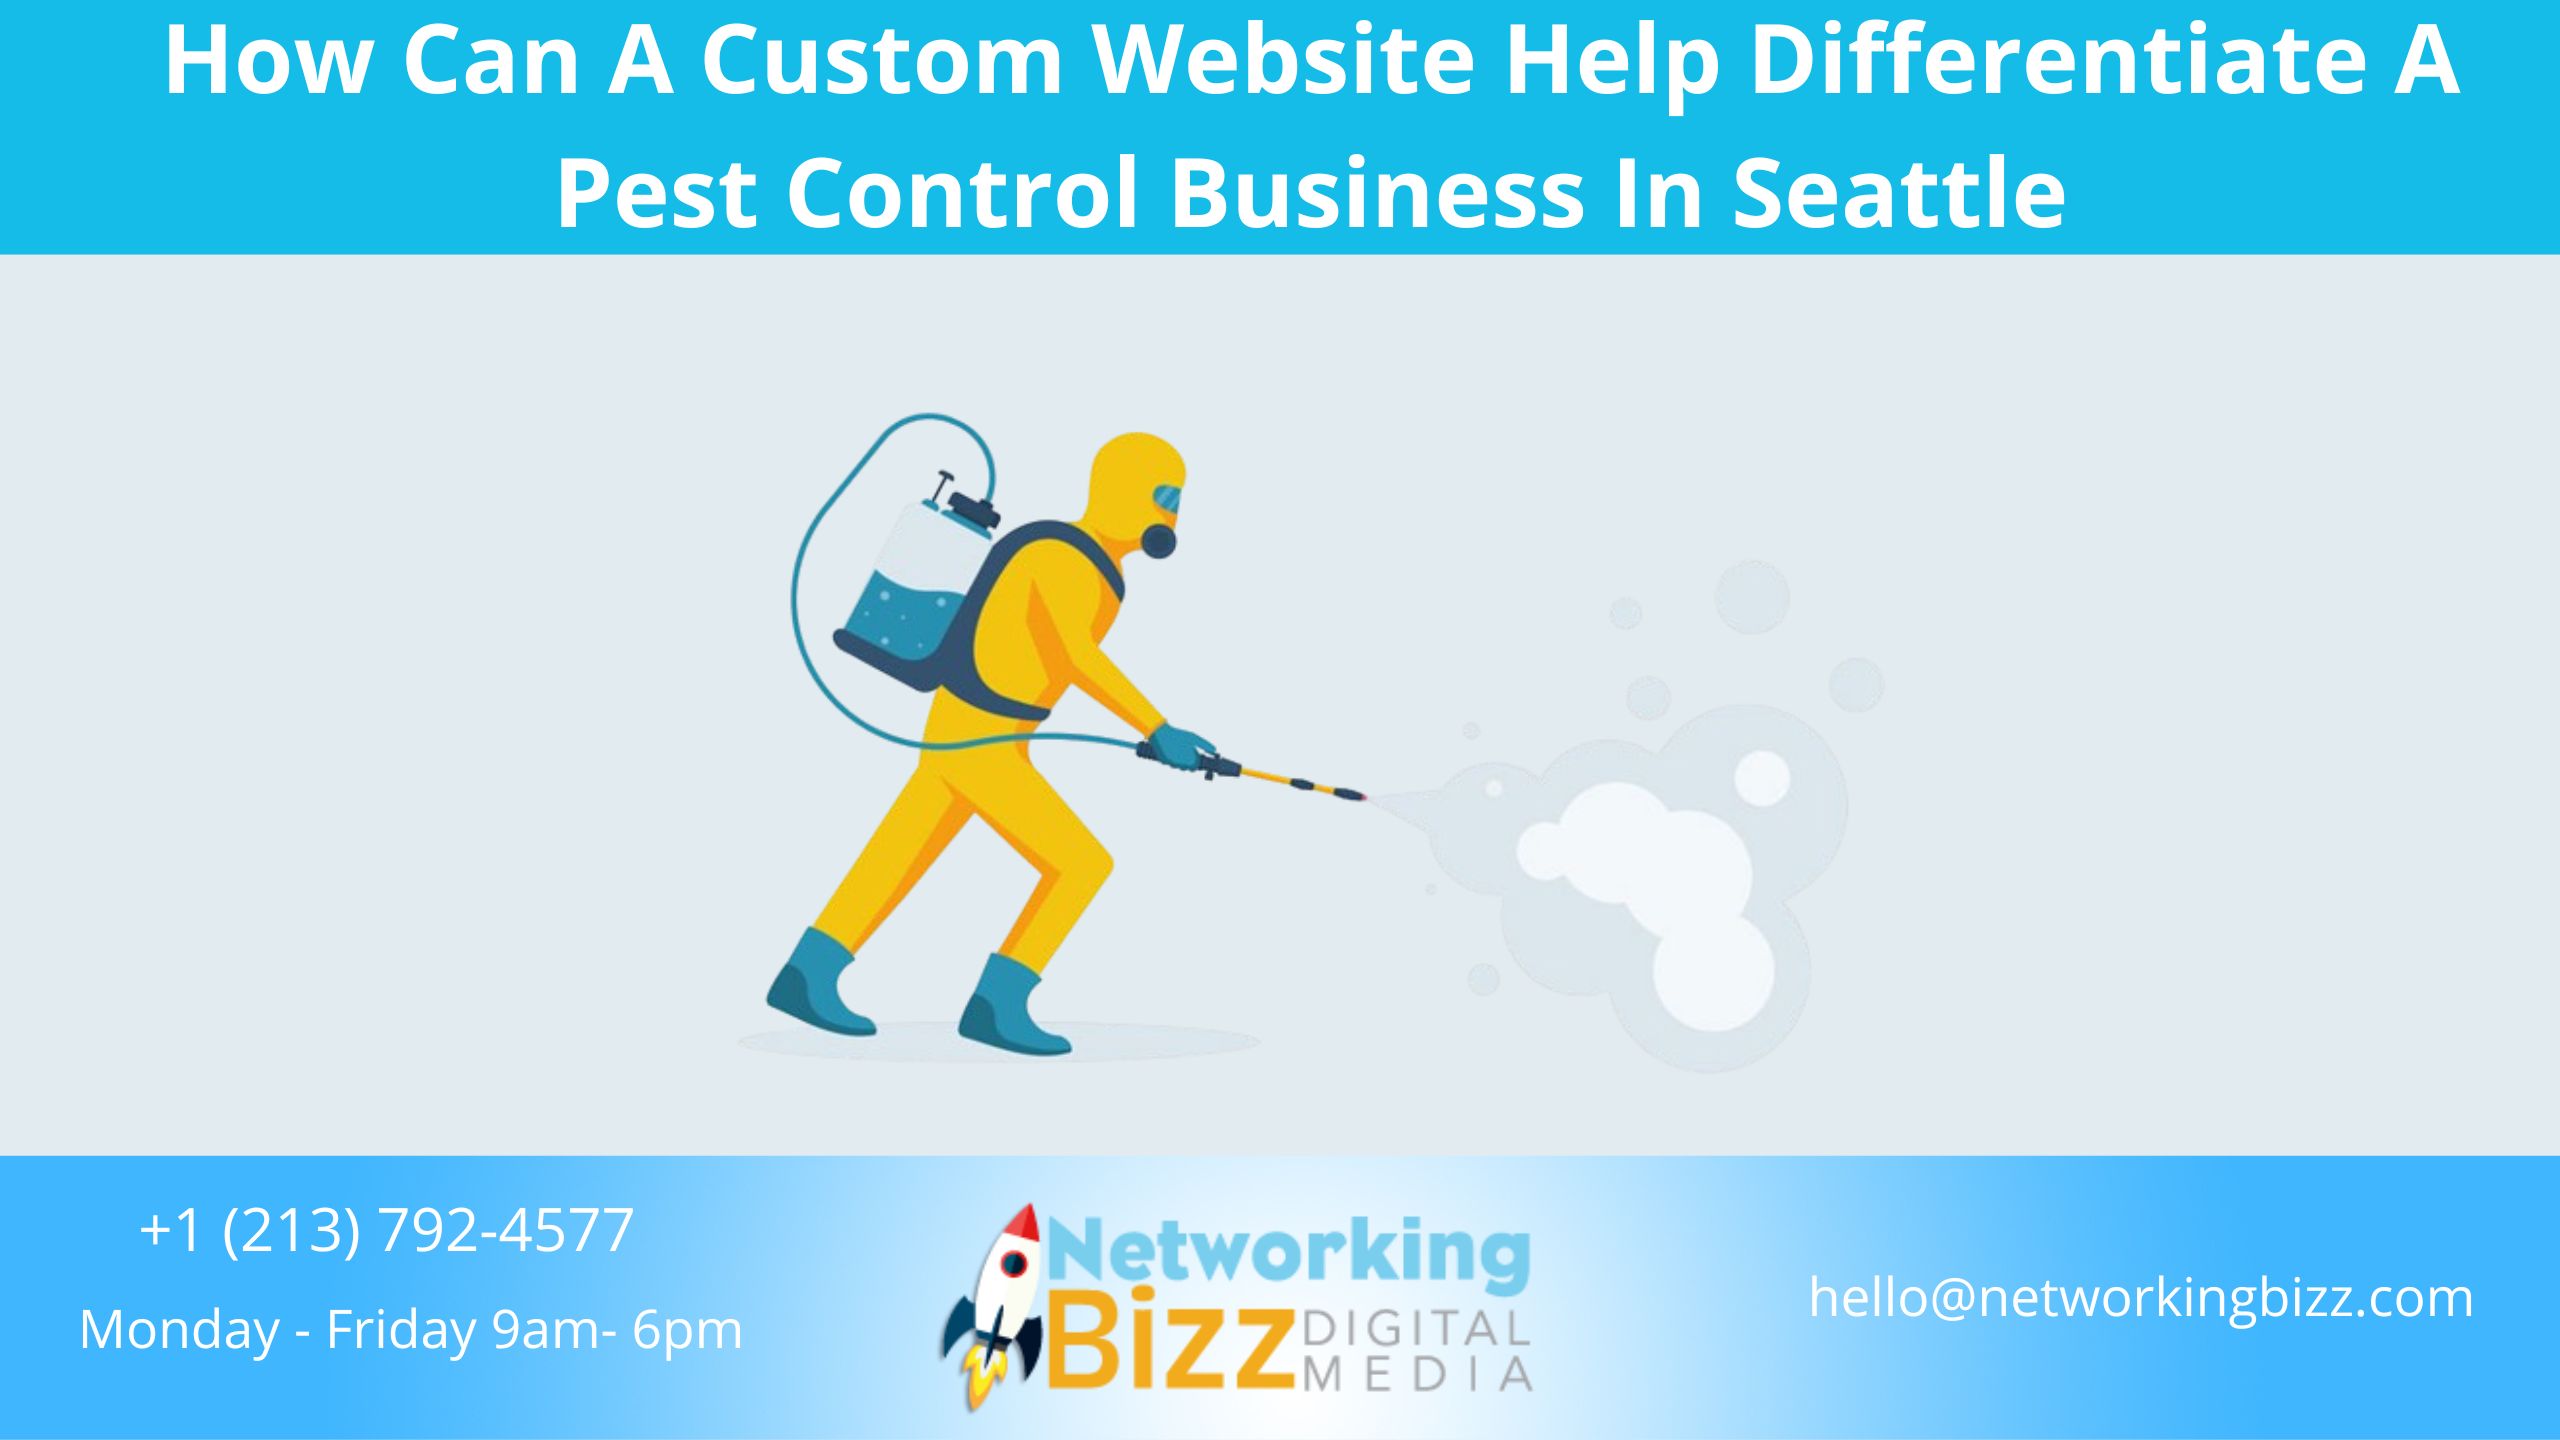 How Can A Custom Website Help Differentiate A Pest Control Business In Seattle